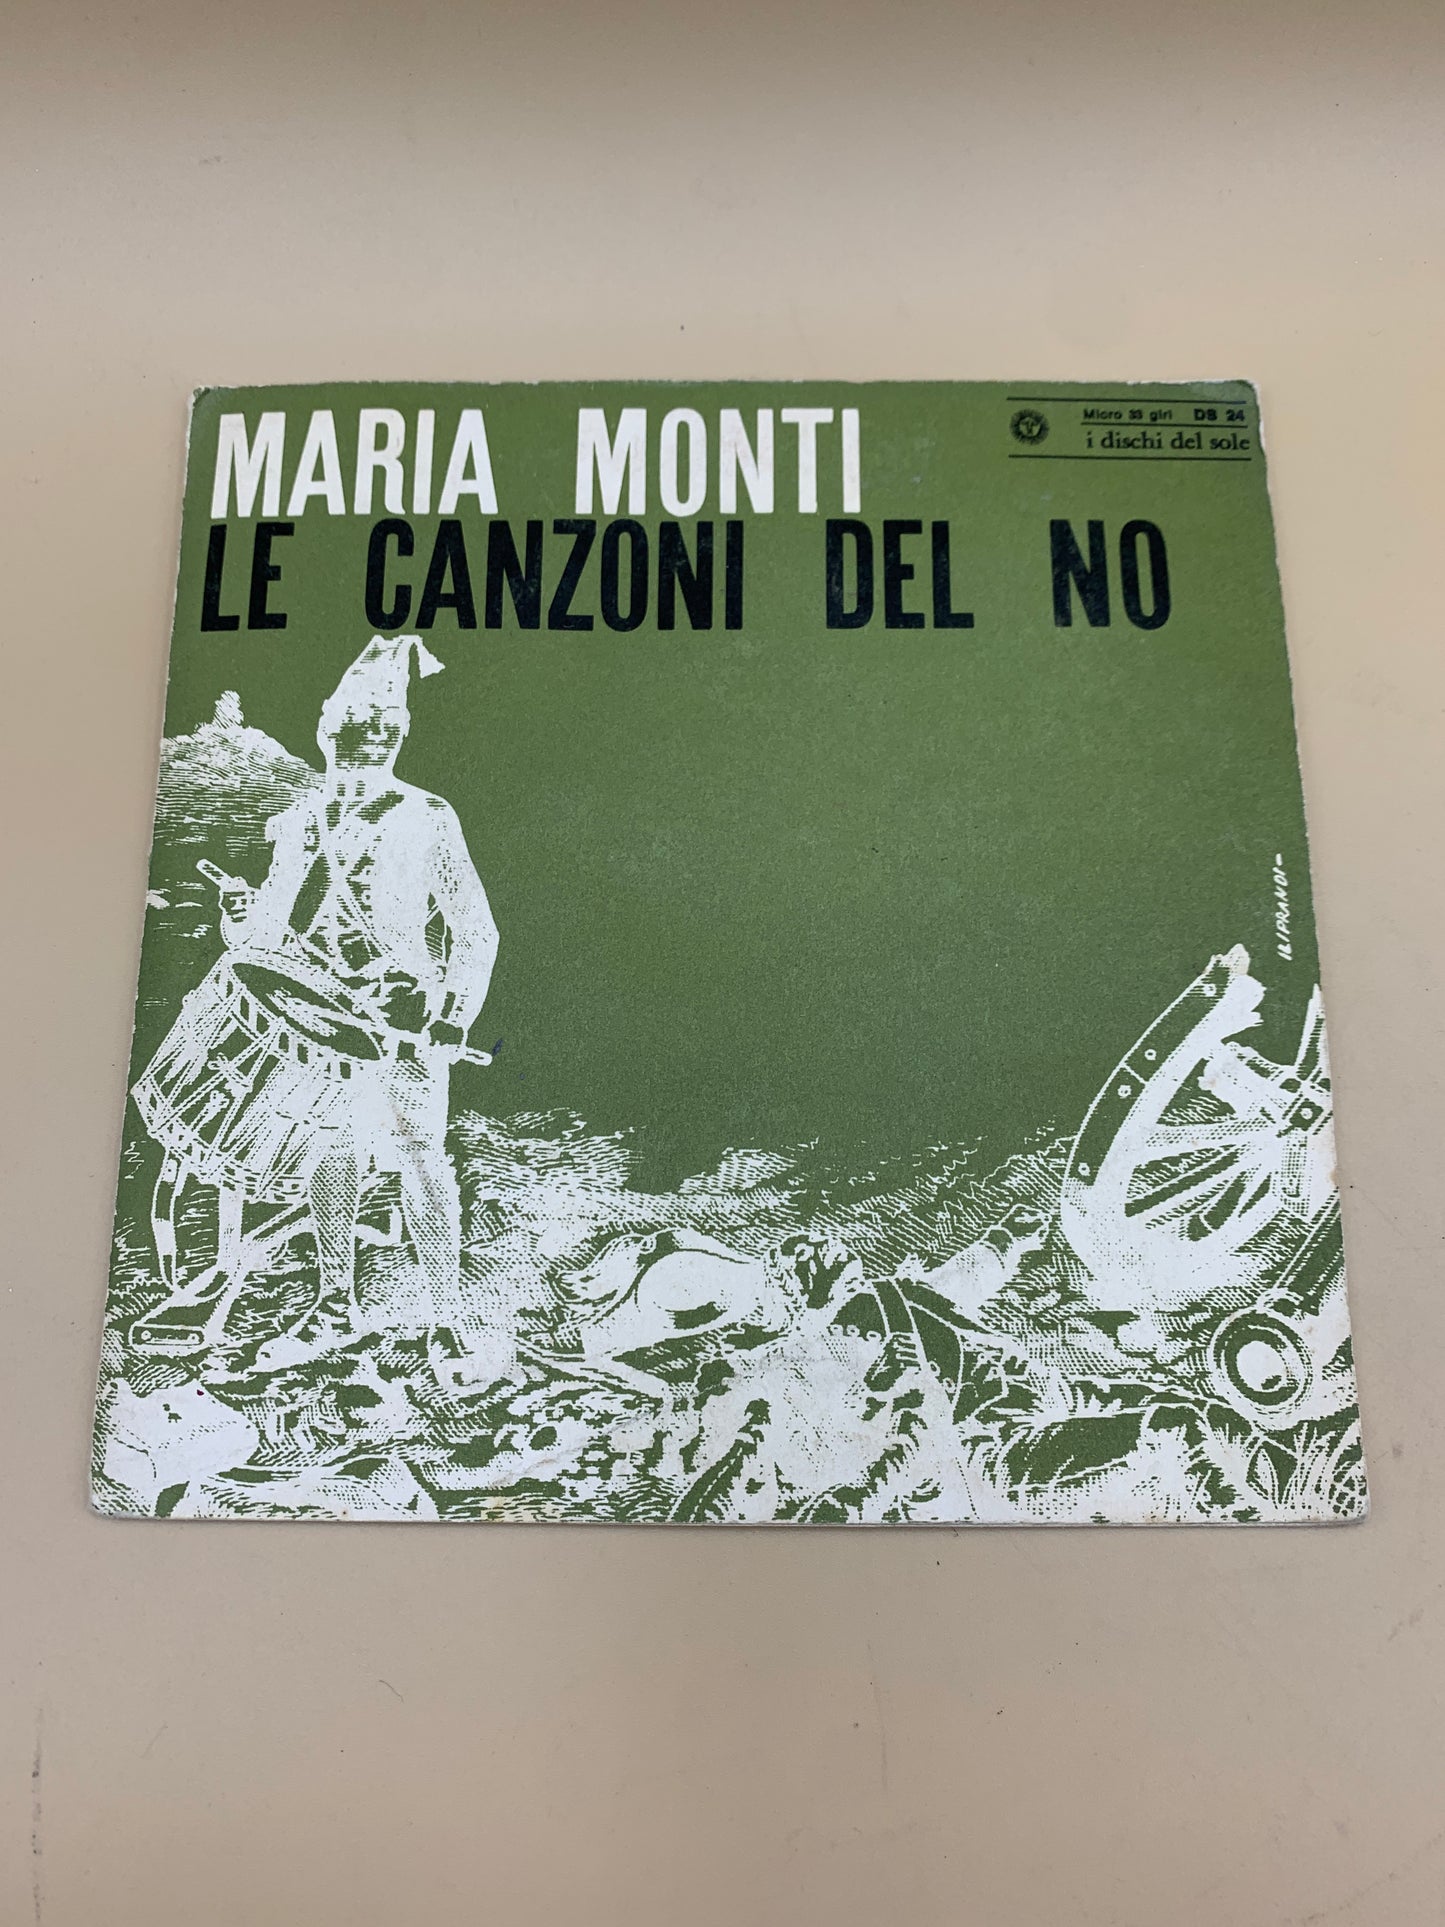 Maria Monti - The songs of no - 45 rpm vinyl record